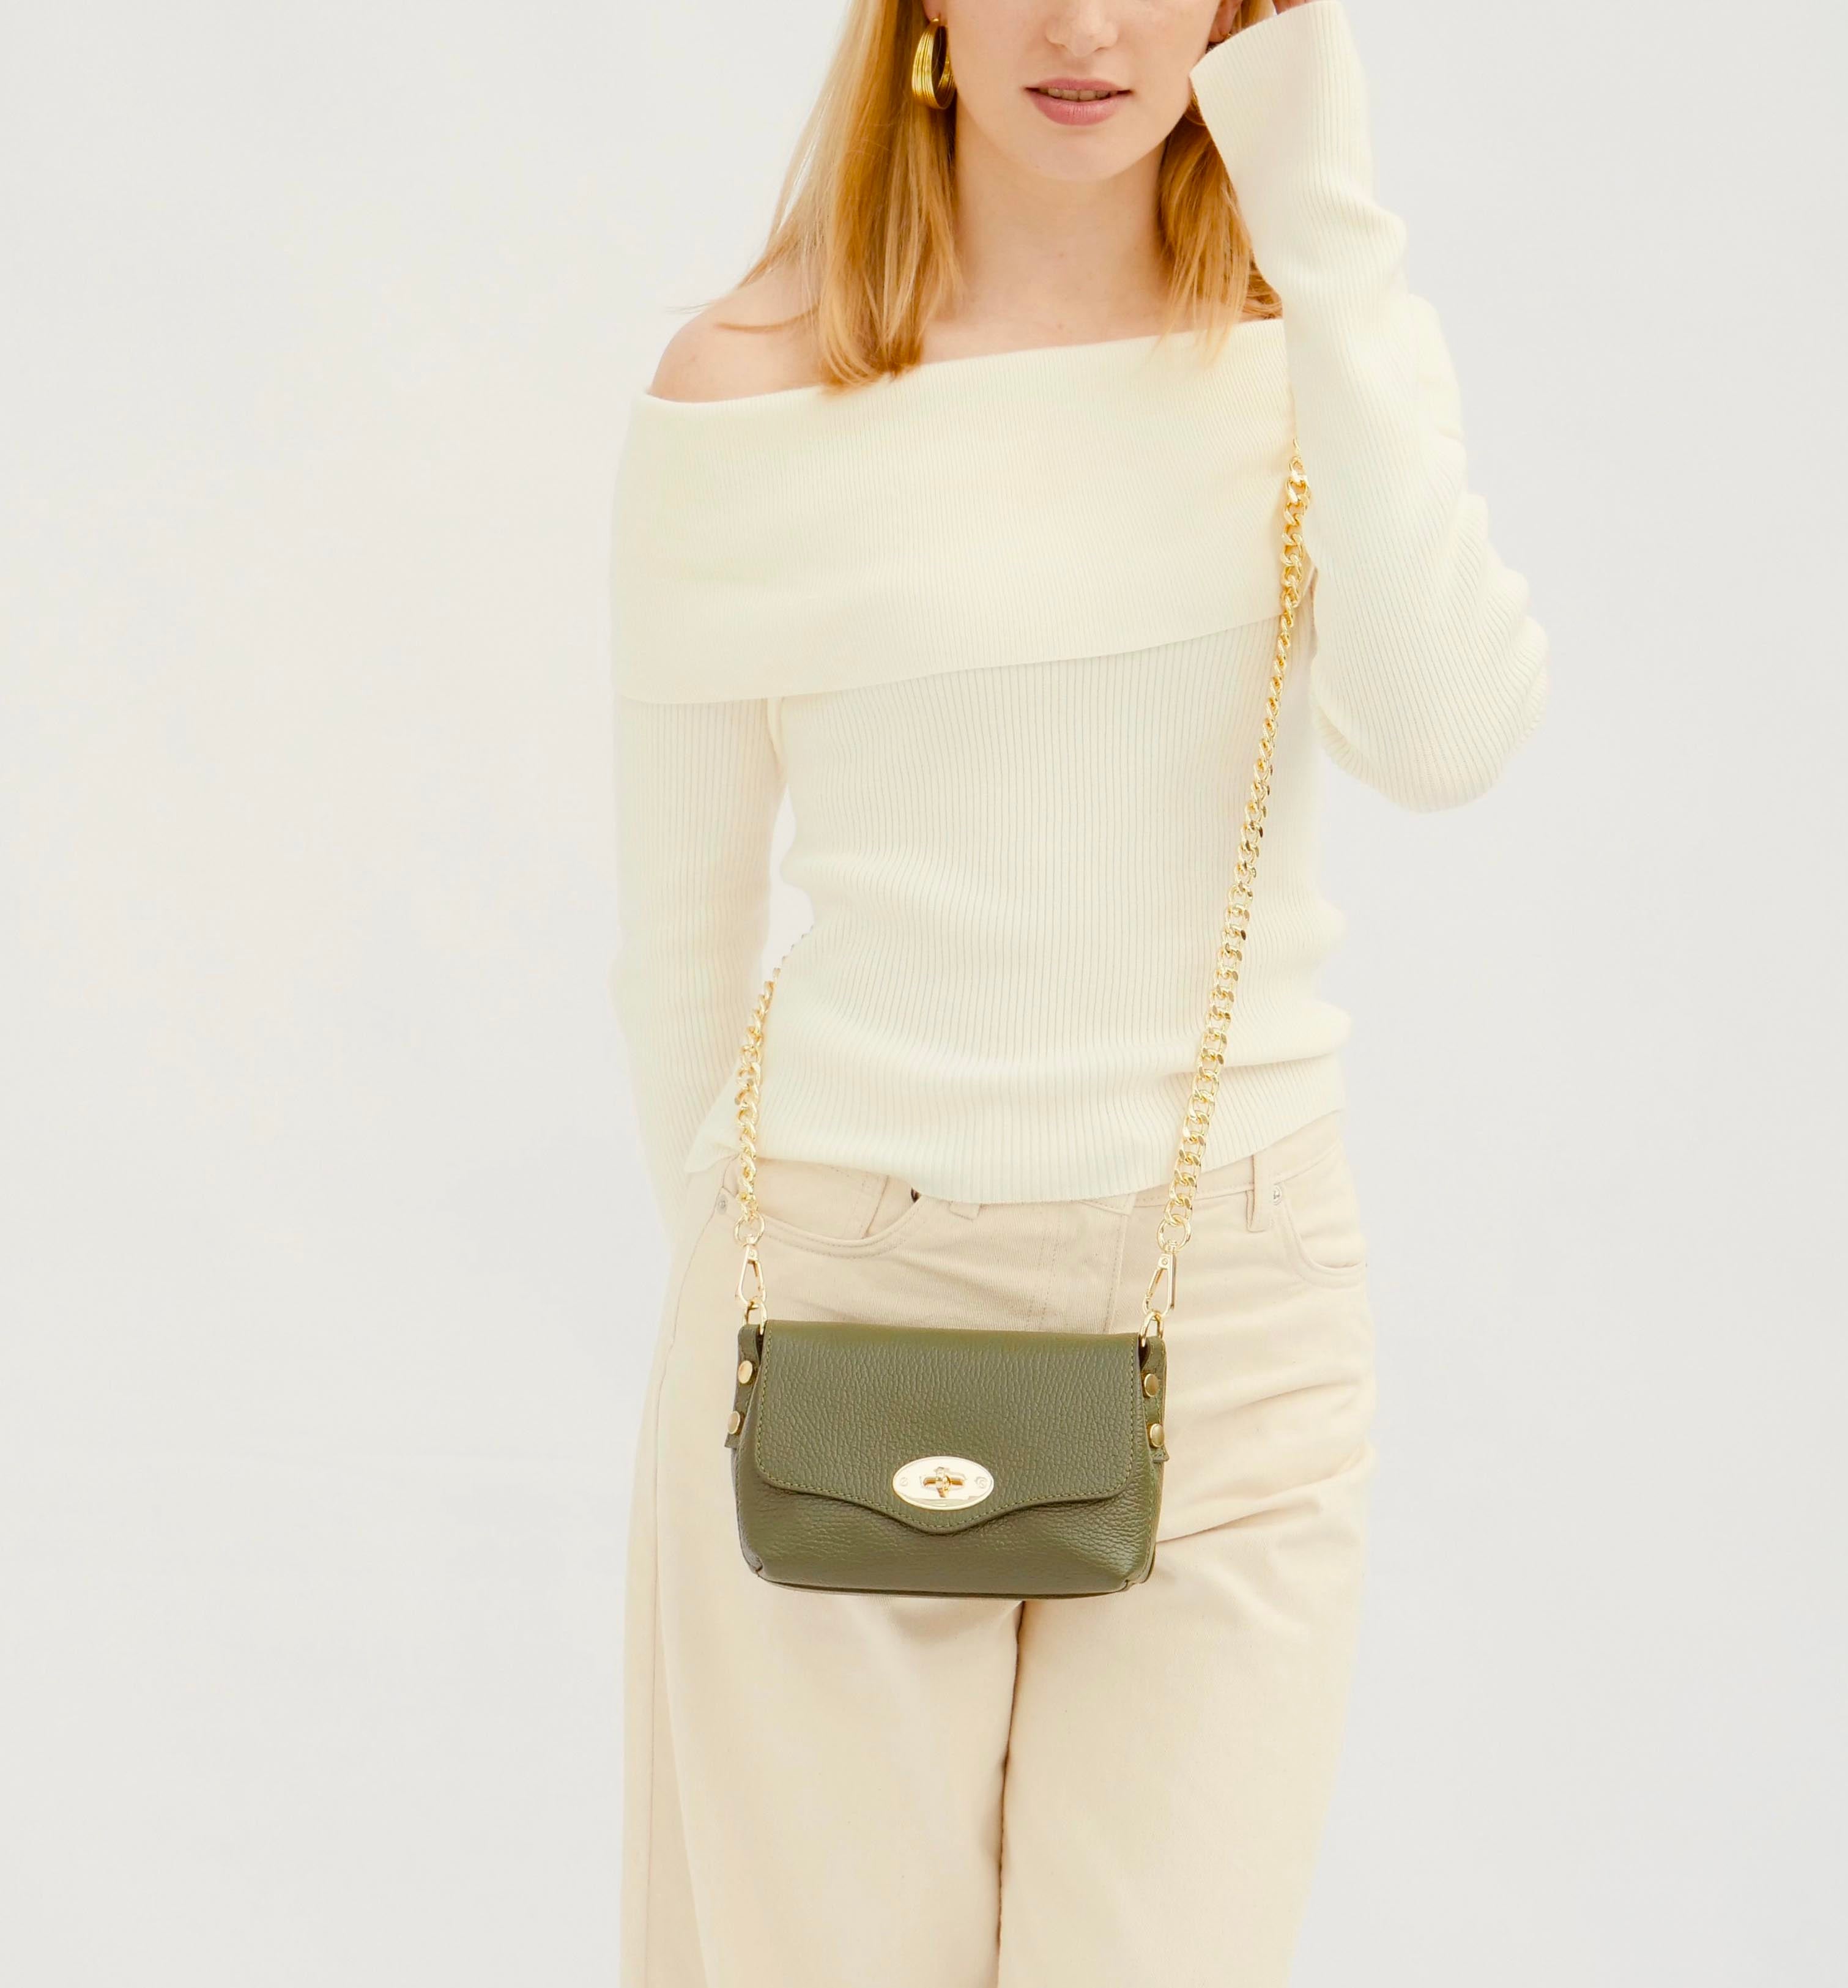 The Maddie Olive Leather Bag